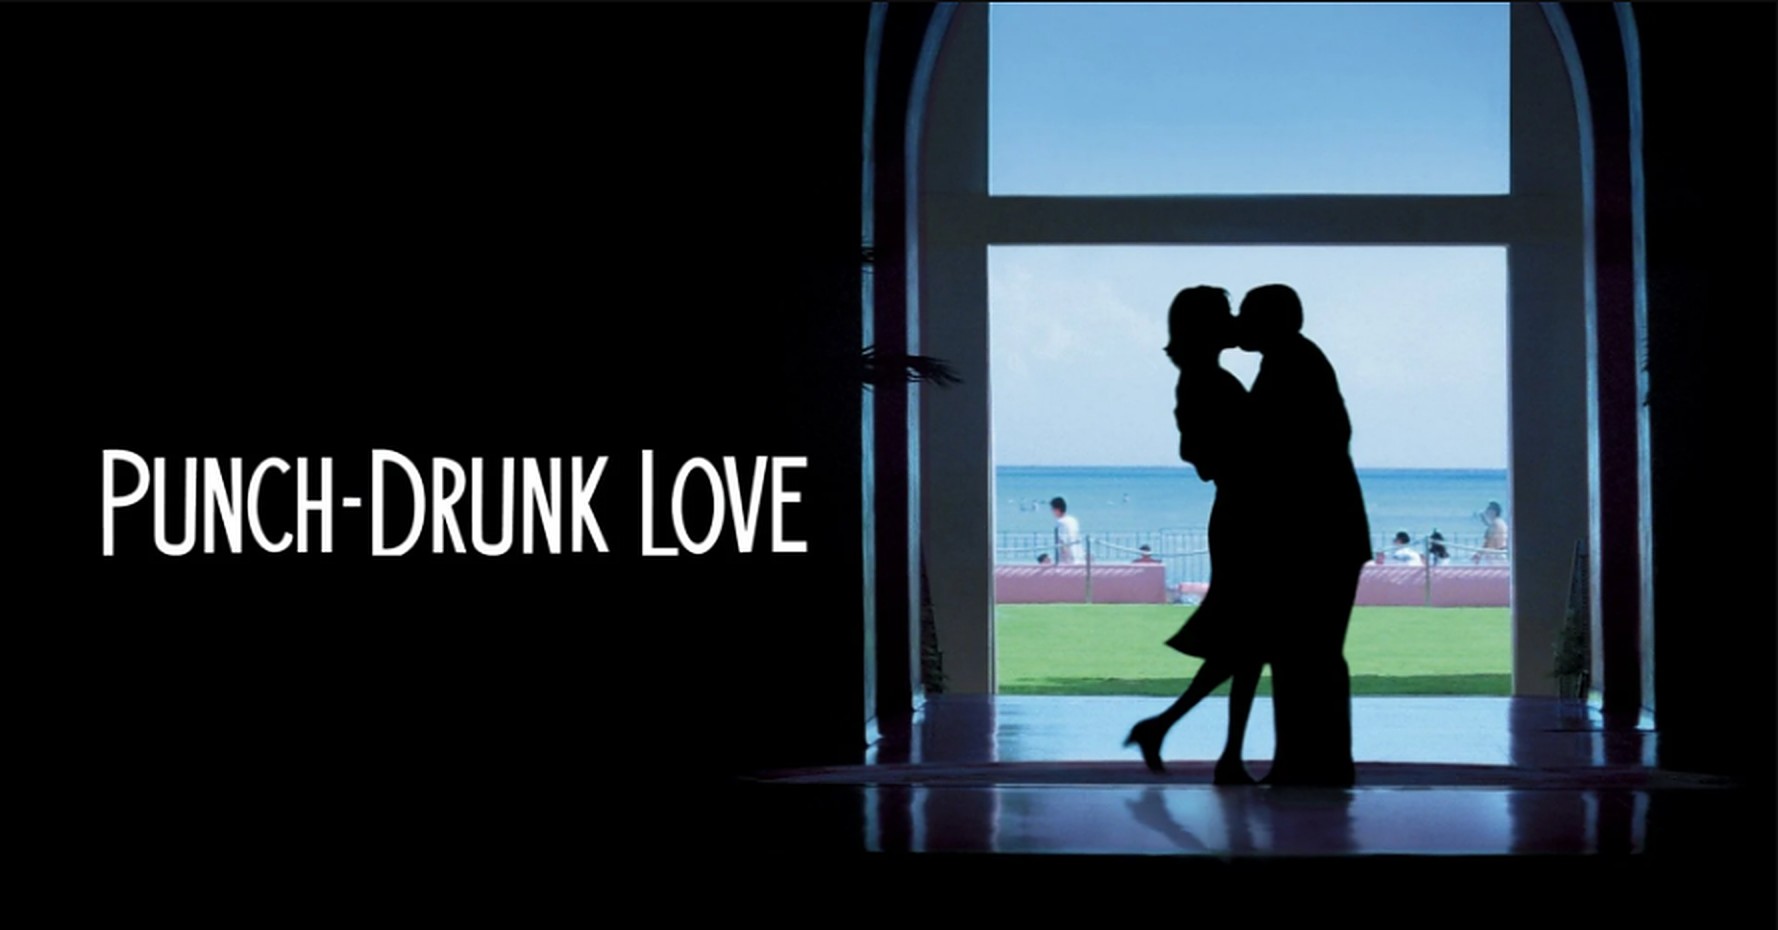 38 Facts about the movie Punch-Drunk Love - Facts.net